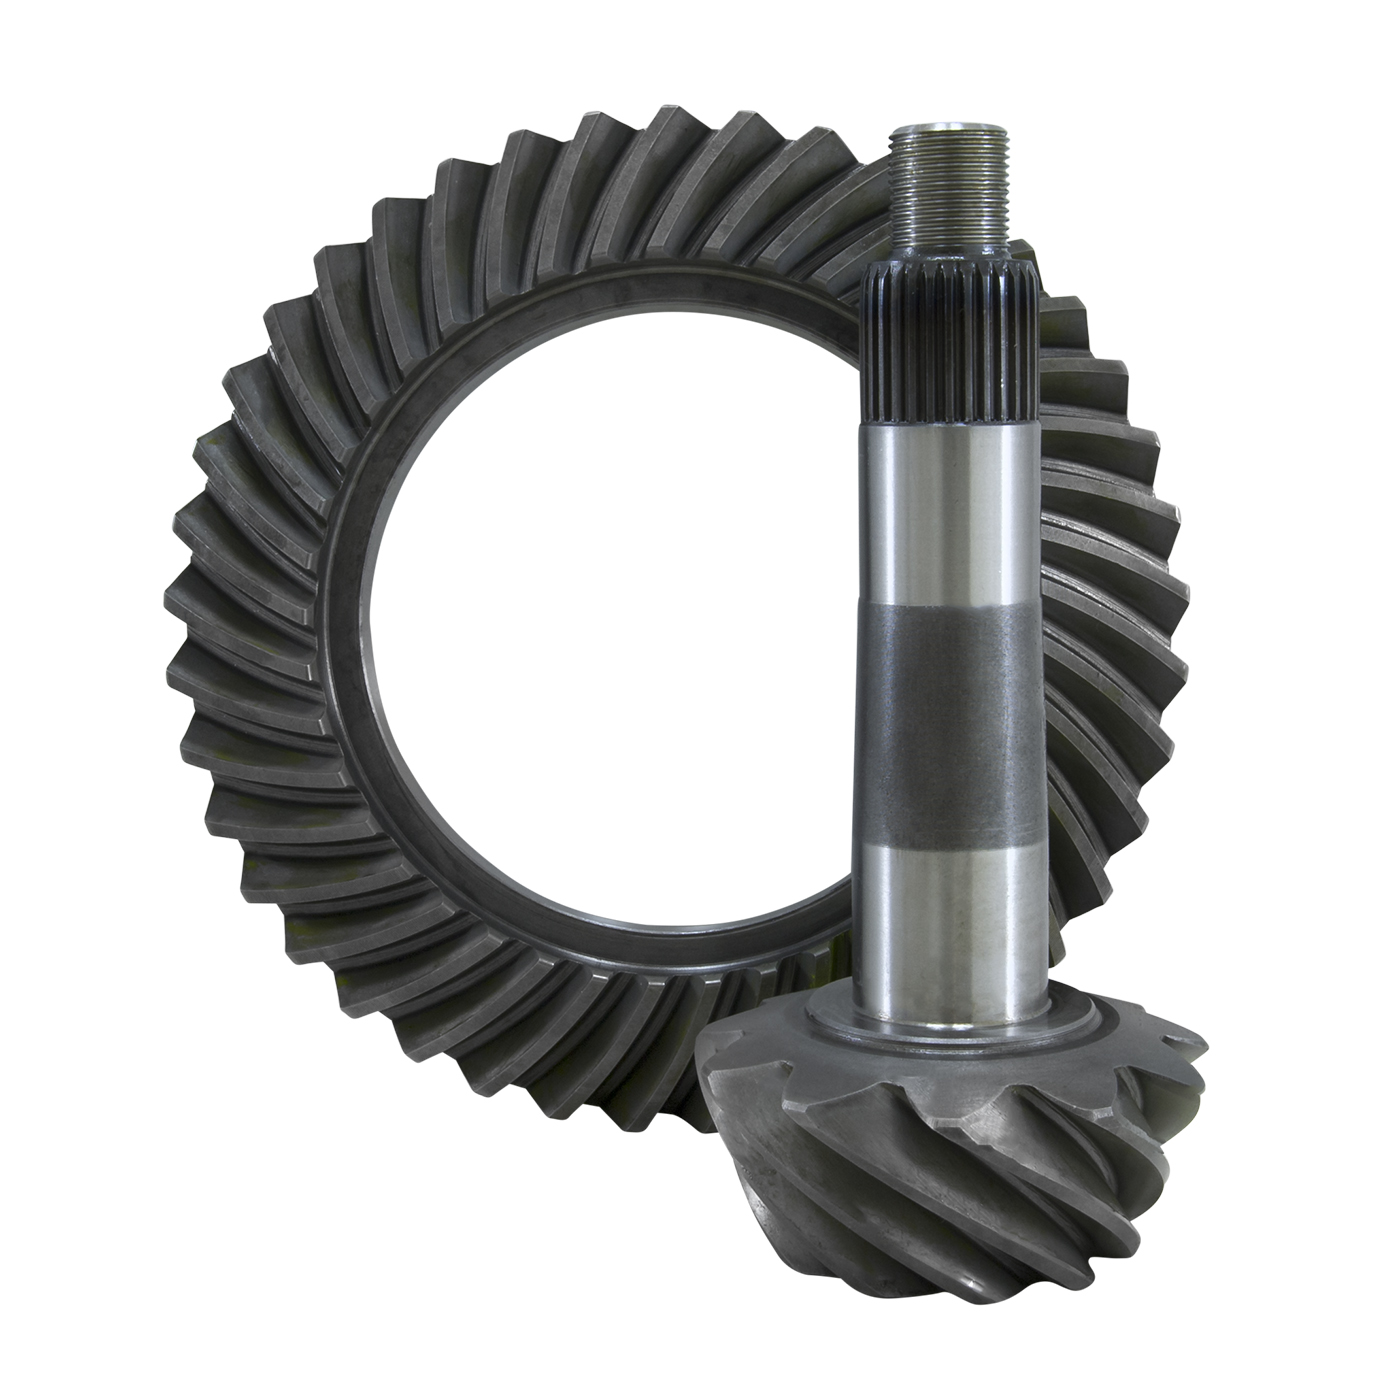 USA Standard Ring & Pinion gear set for GM 12 bolt truck in a 4.11 ratio